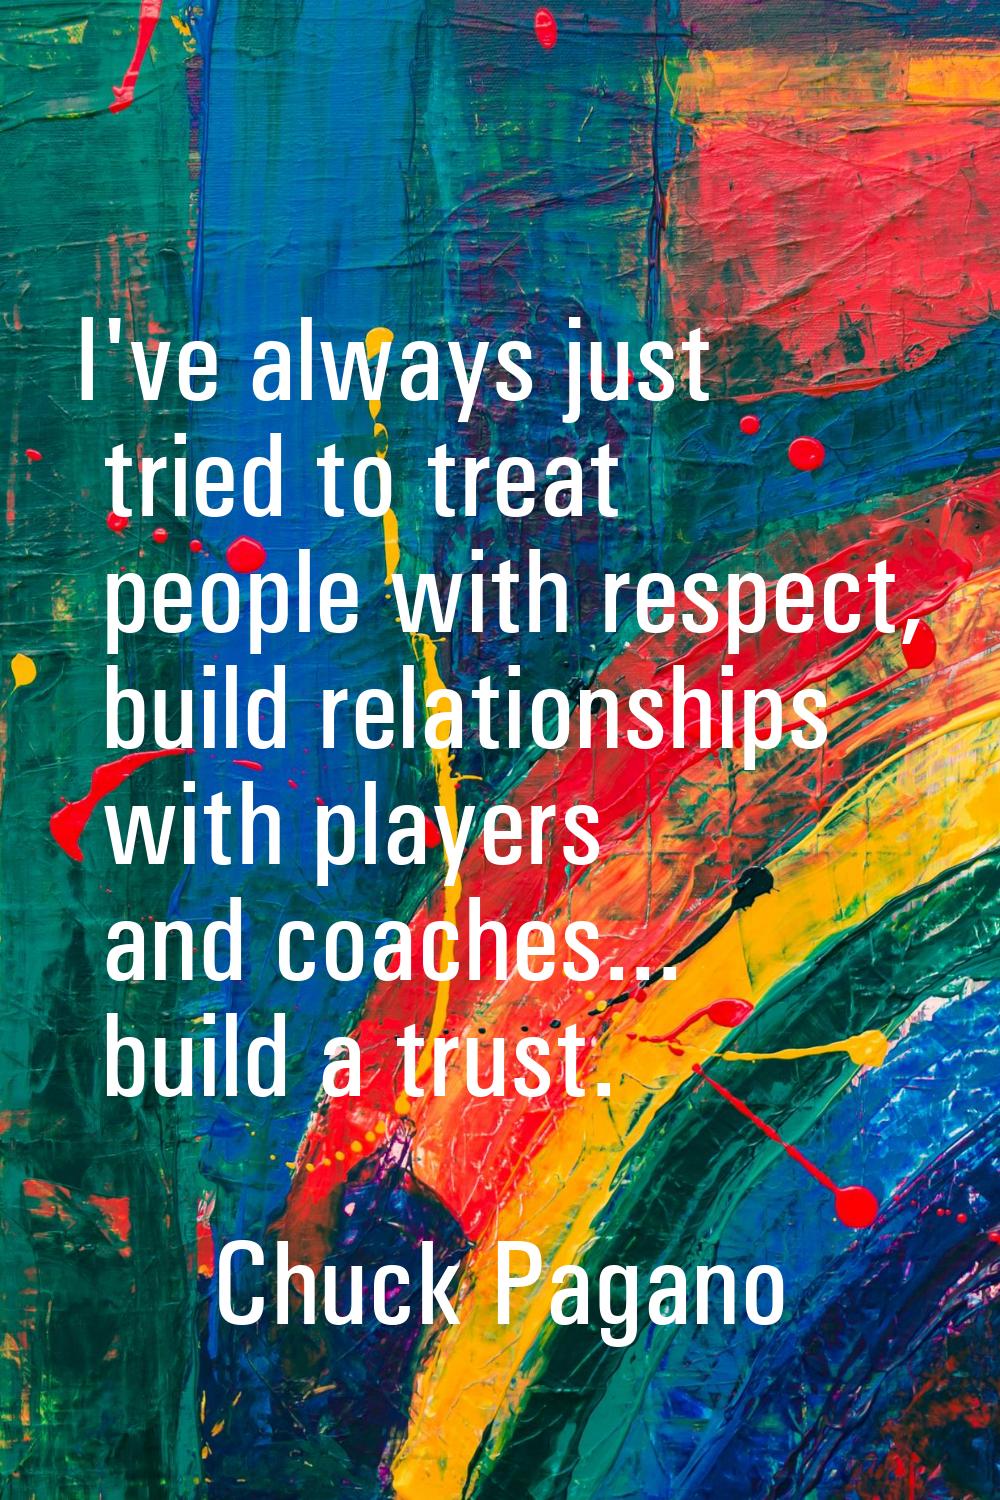 I've always just tried to treat people with respect, build relationships with players and coaches..